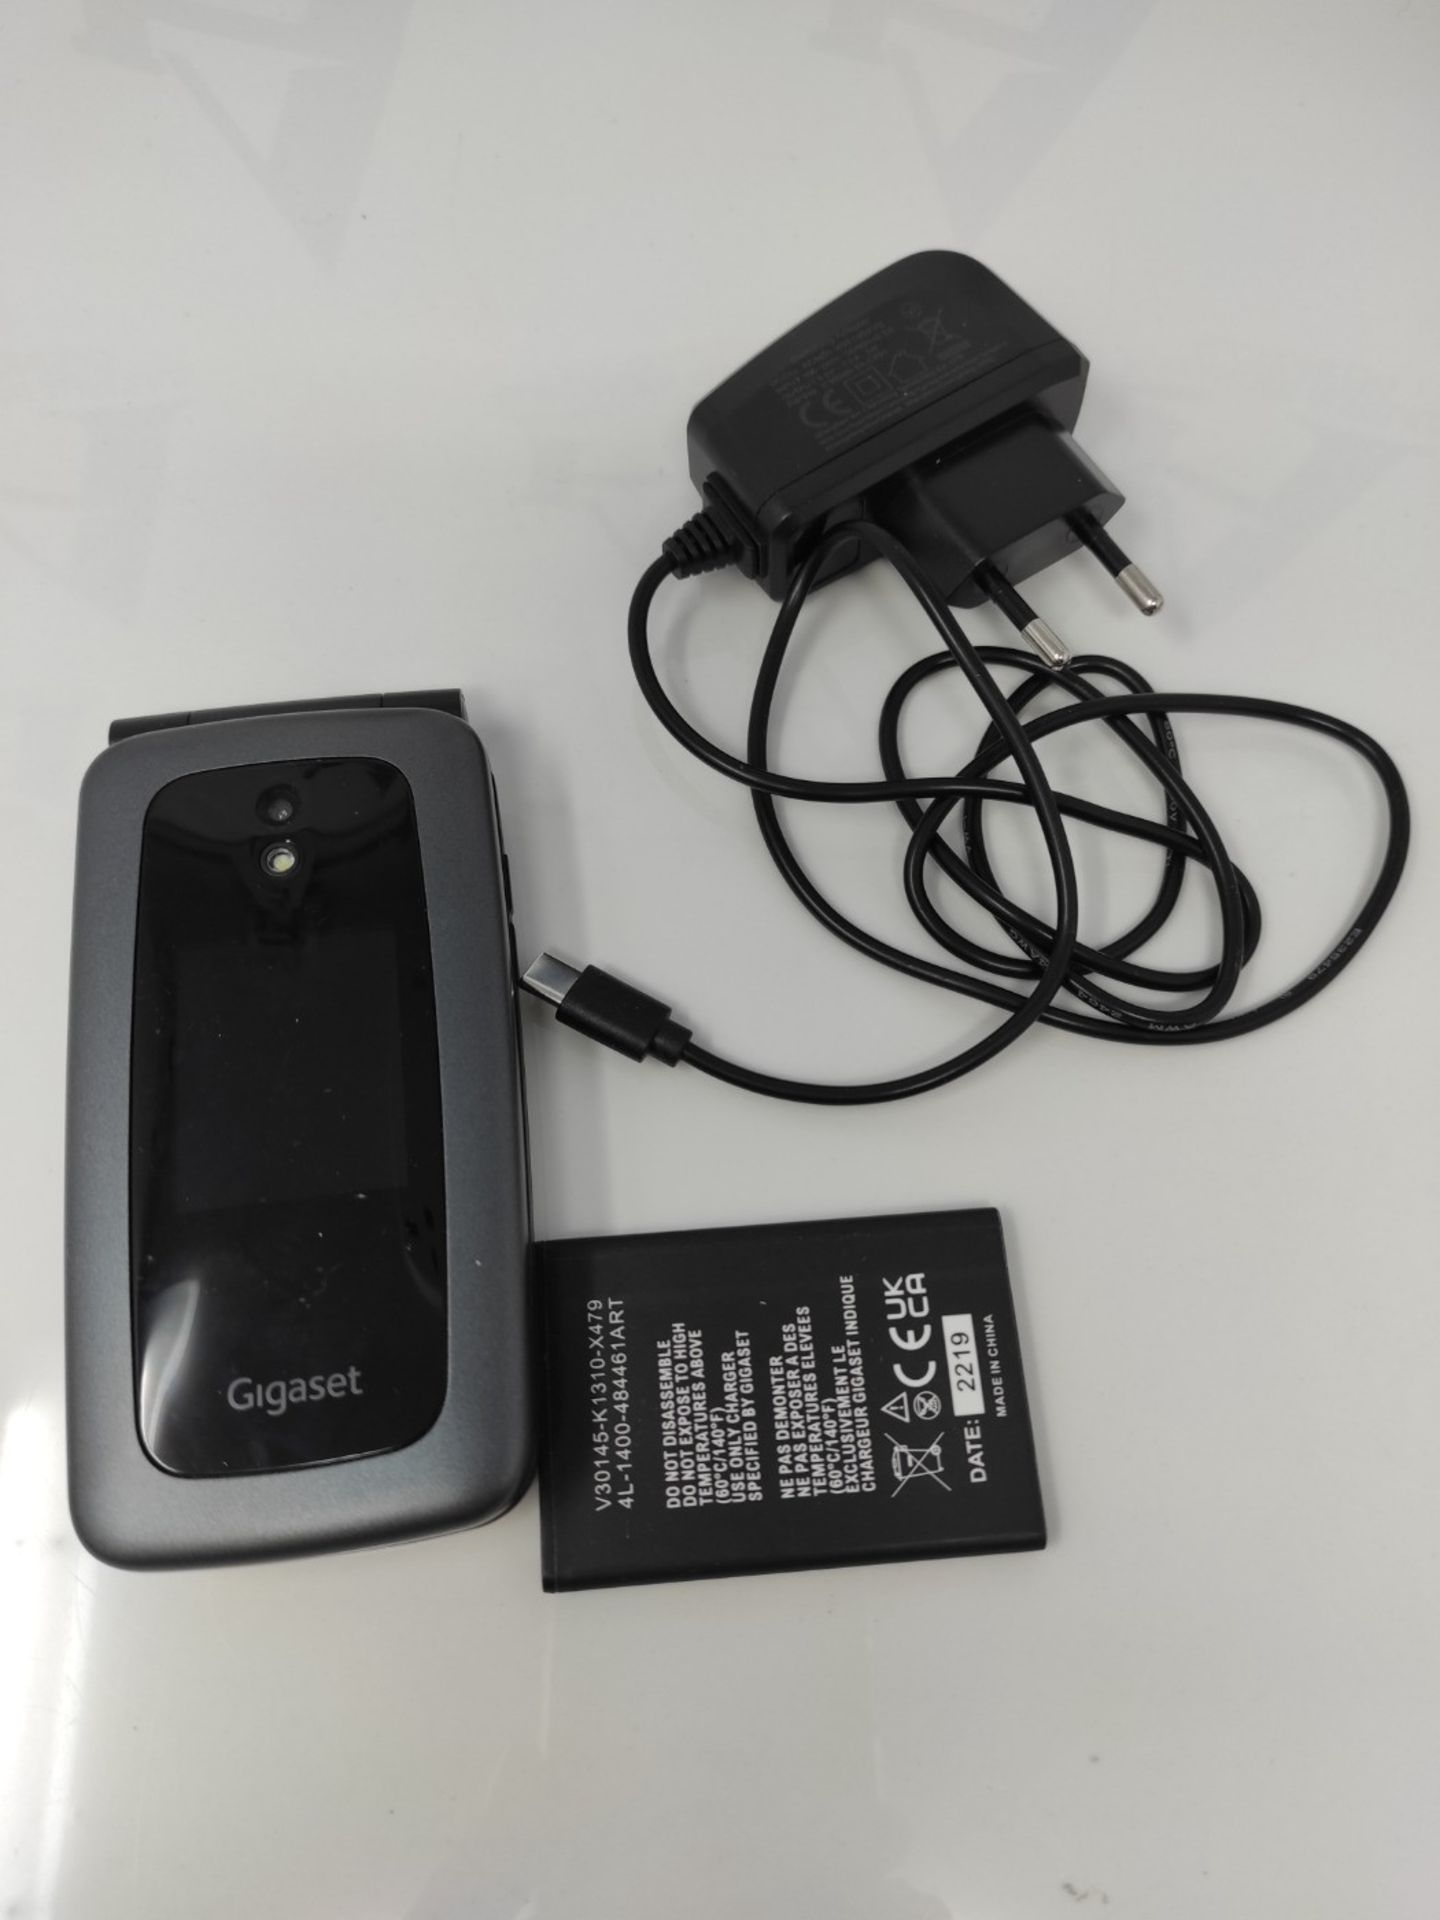 RRP £89.00 Gigaset GL7 - Internet-ready mobile phone with SOS function - easy to use with large b - Image 2 of 3